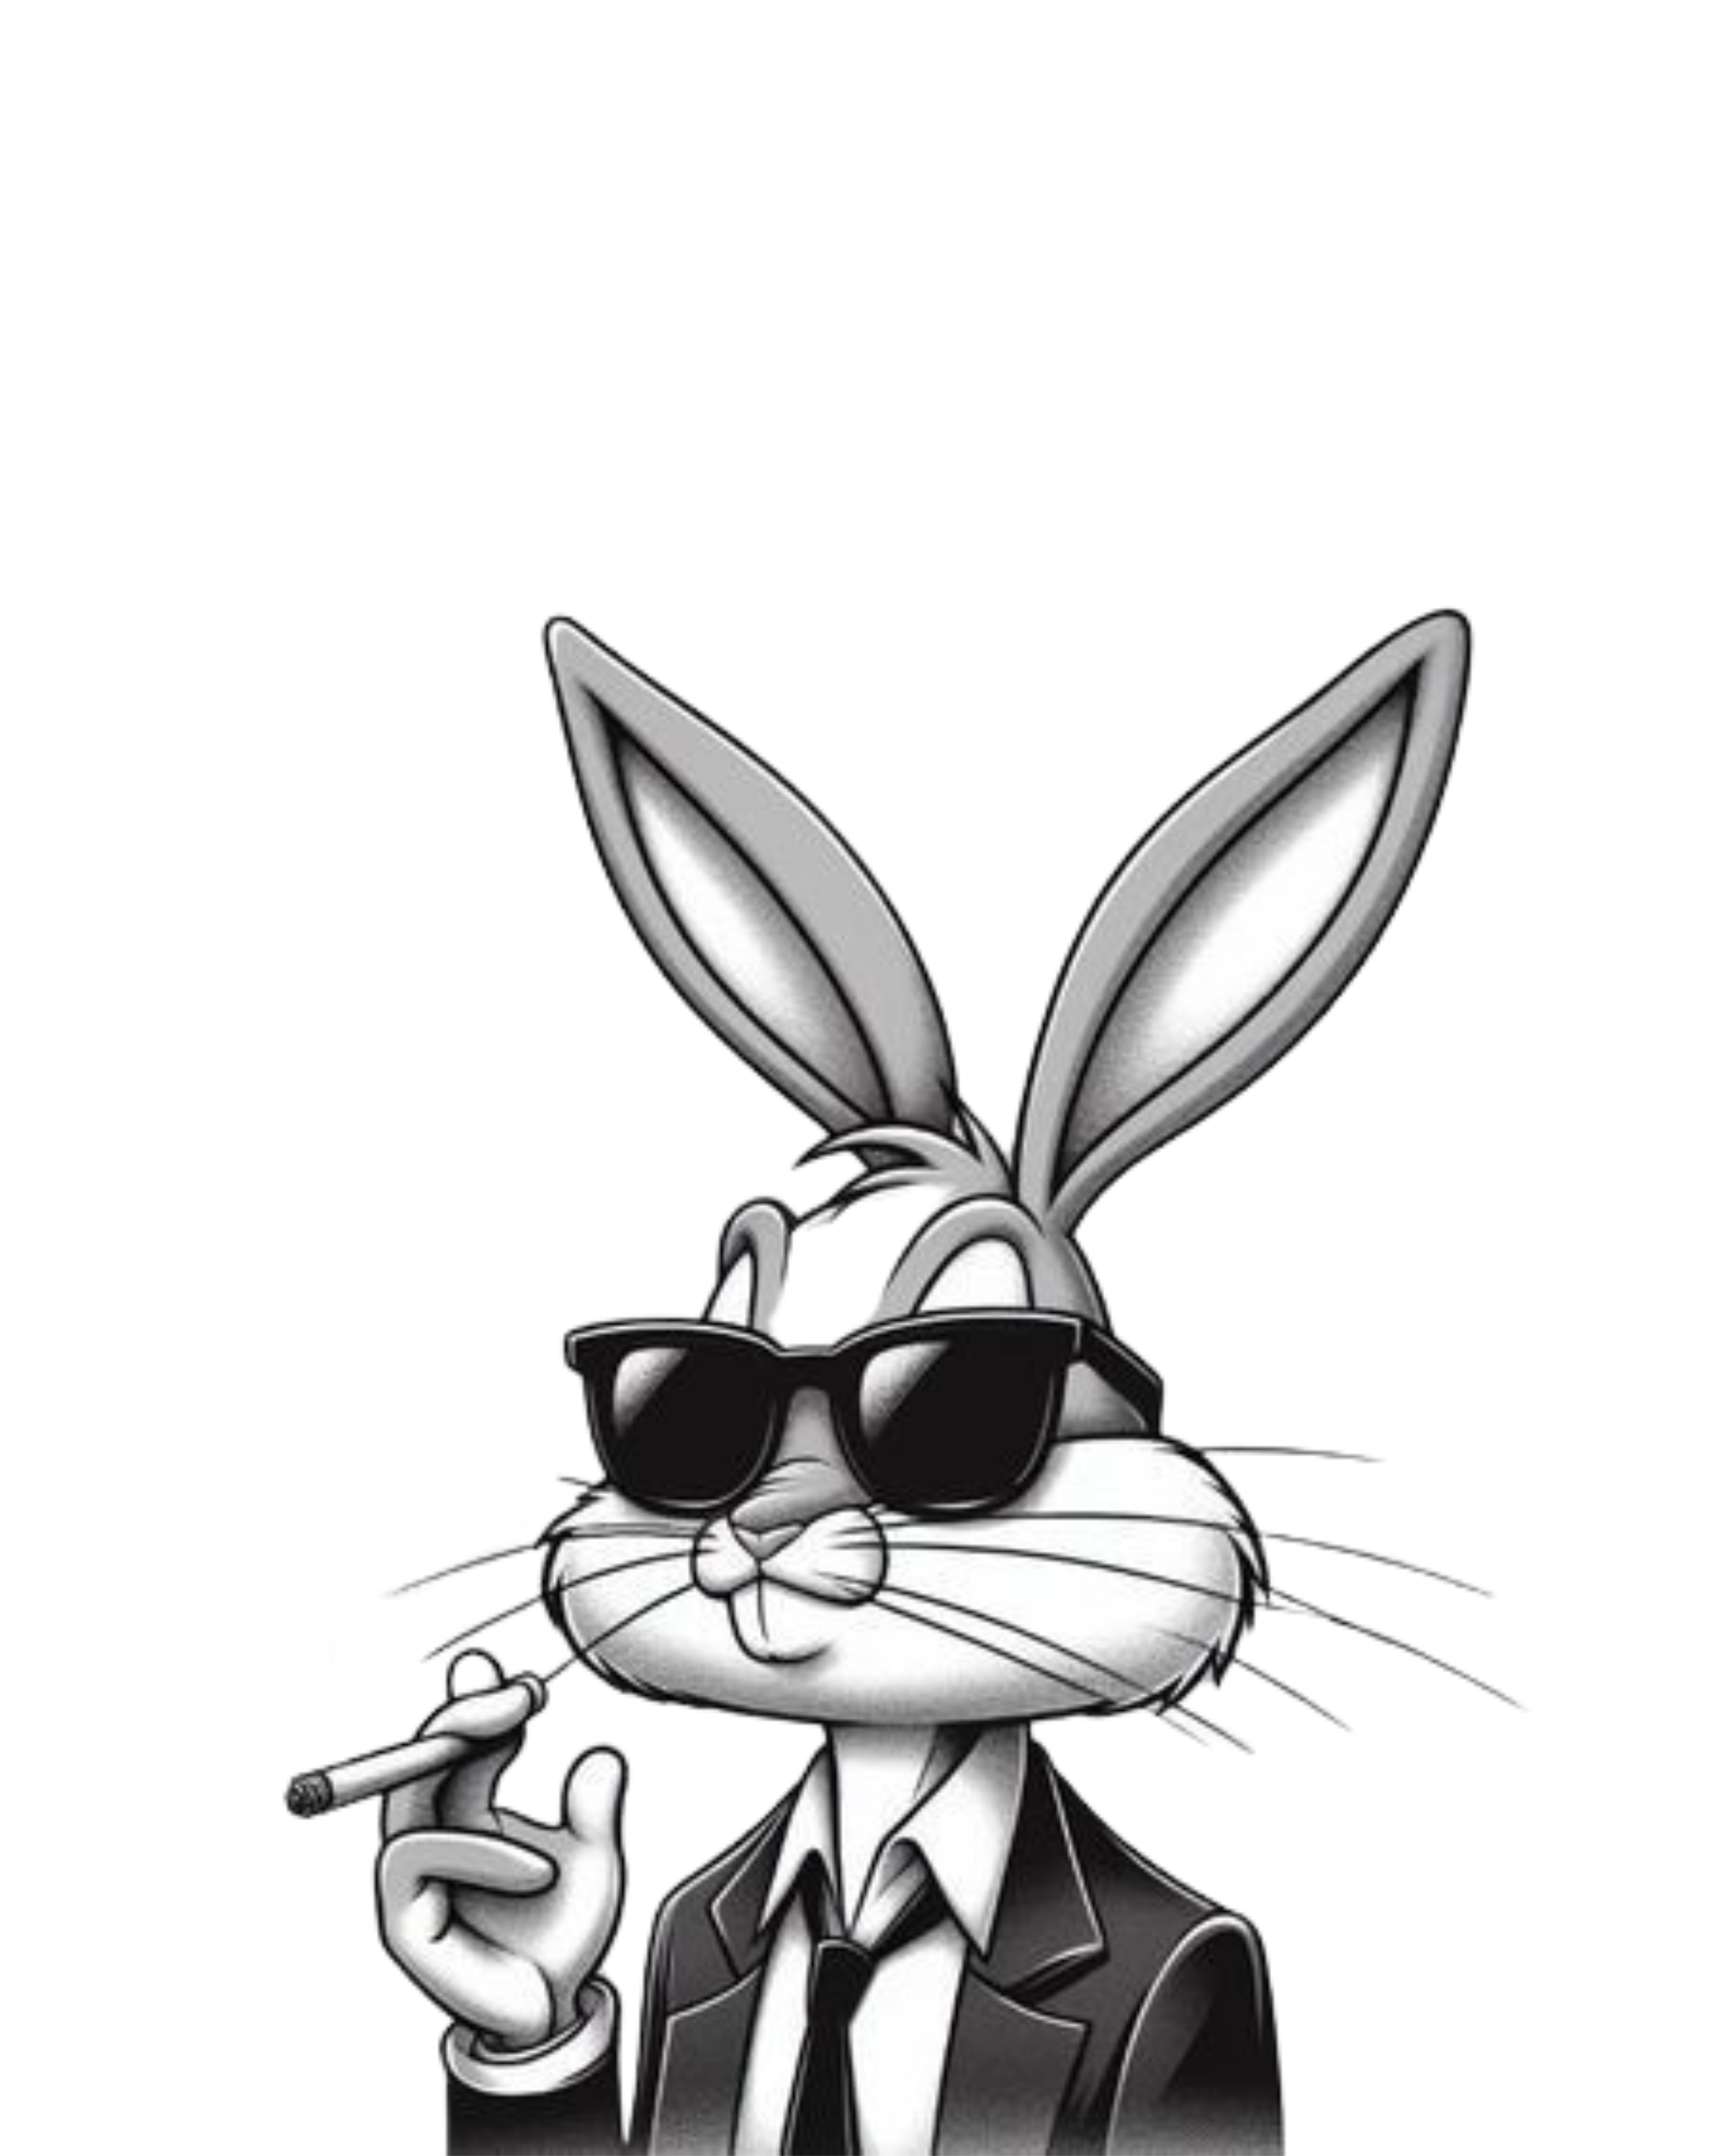 a cartoon of a rabbit wearing sunglasses and smoking a cigarette